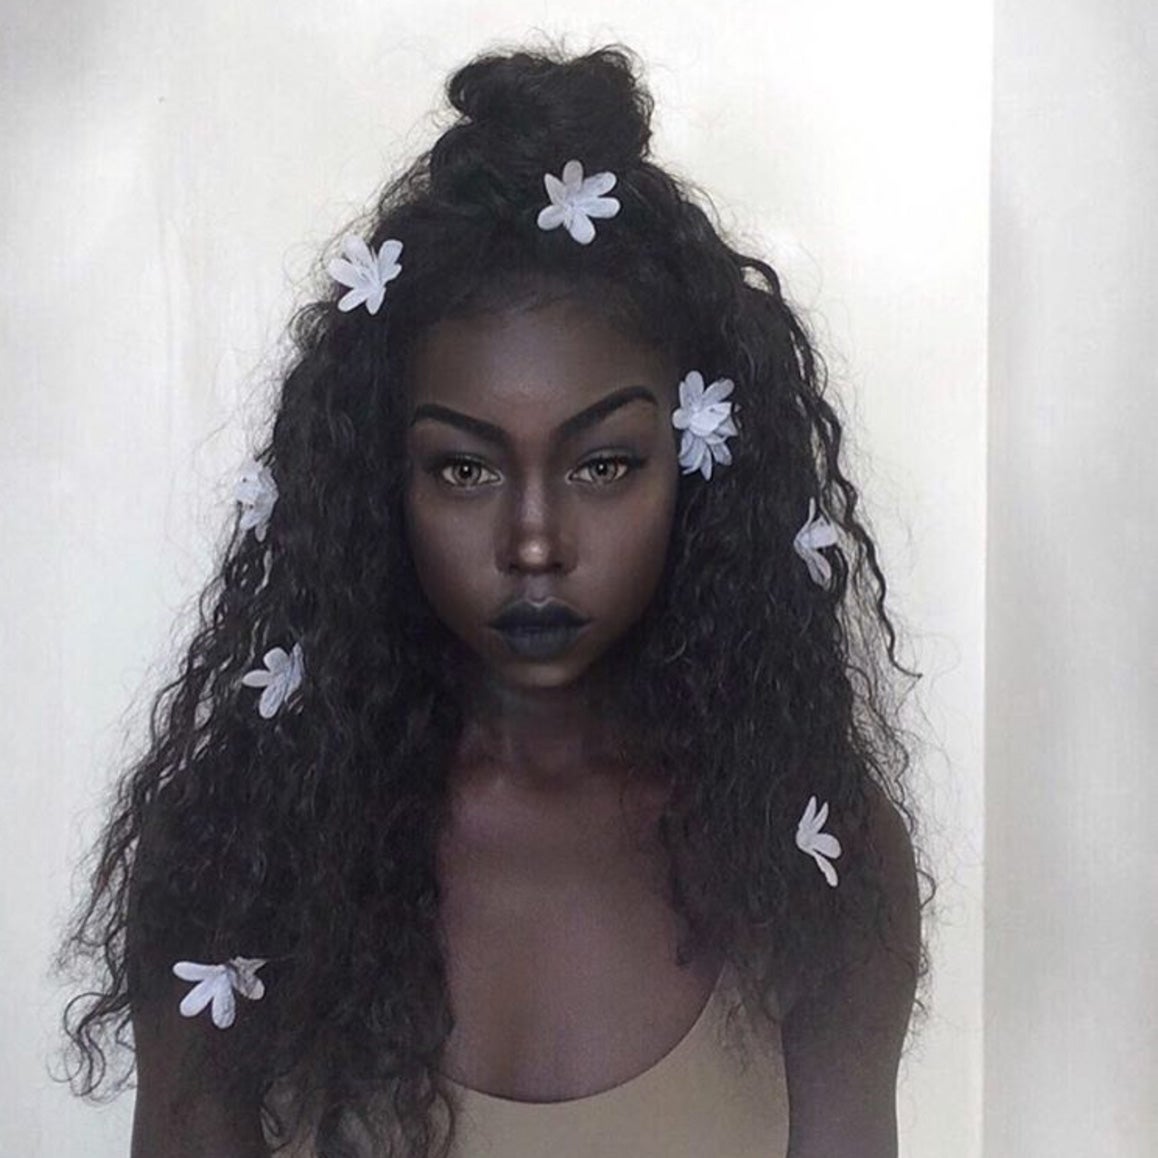 These Festival Season Hairstyles Don't Require A Flower Crown
